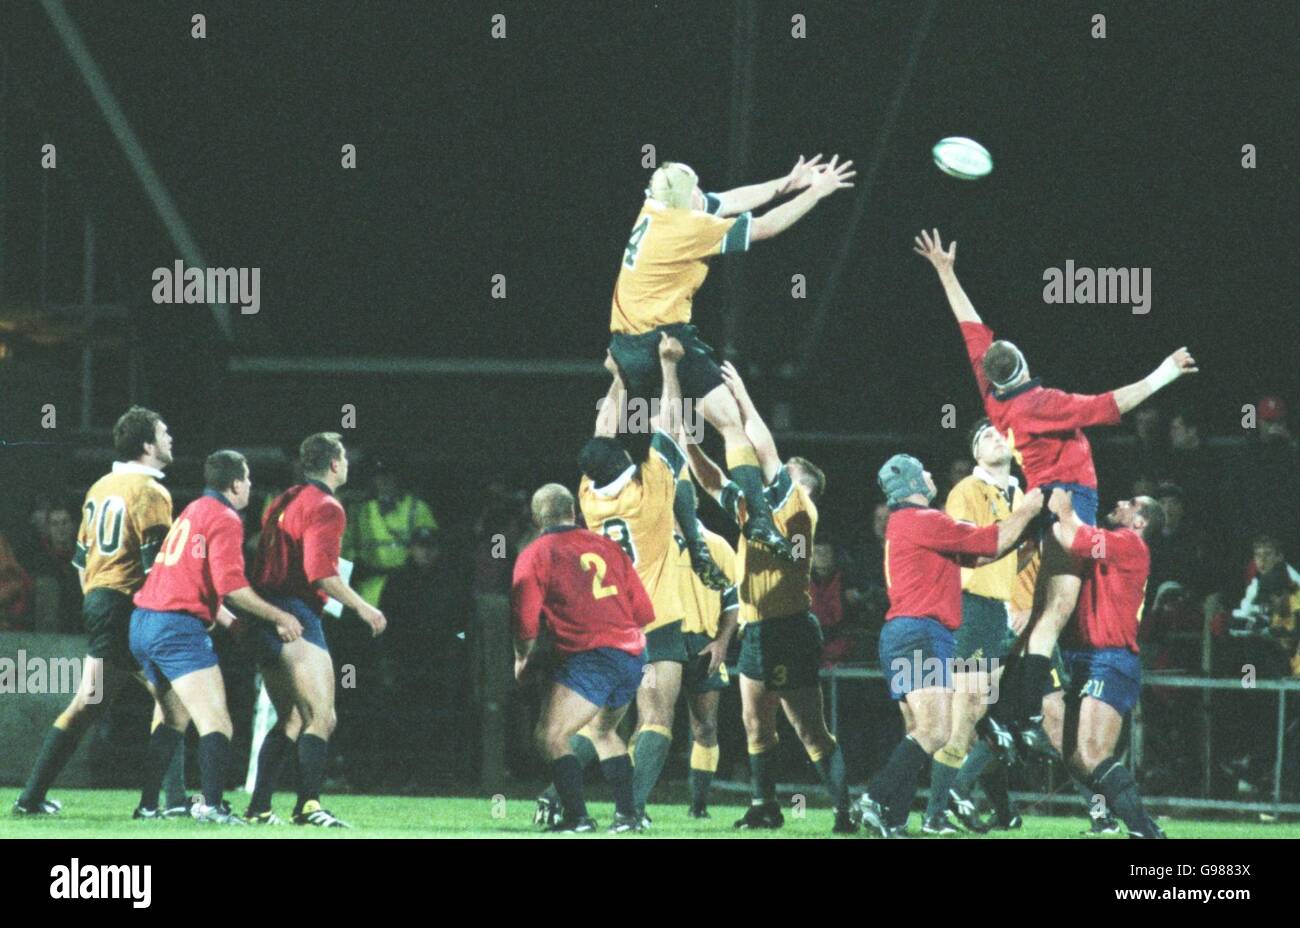 Rugby-Union - Rugby World Cup 99 - Pool E - Australien V Rumänien Stockfoto